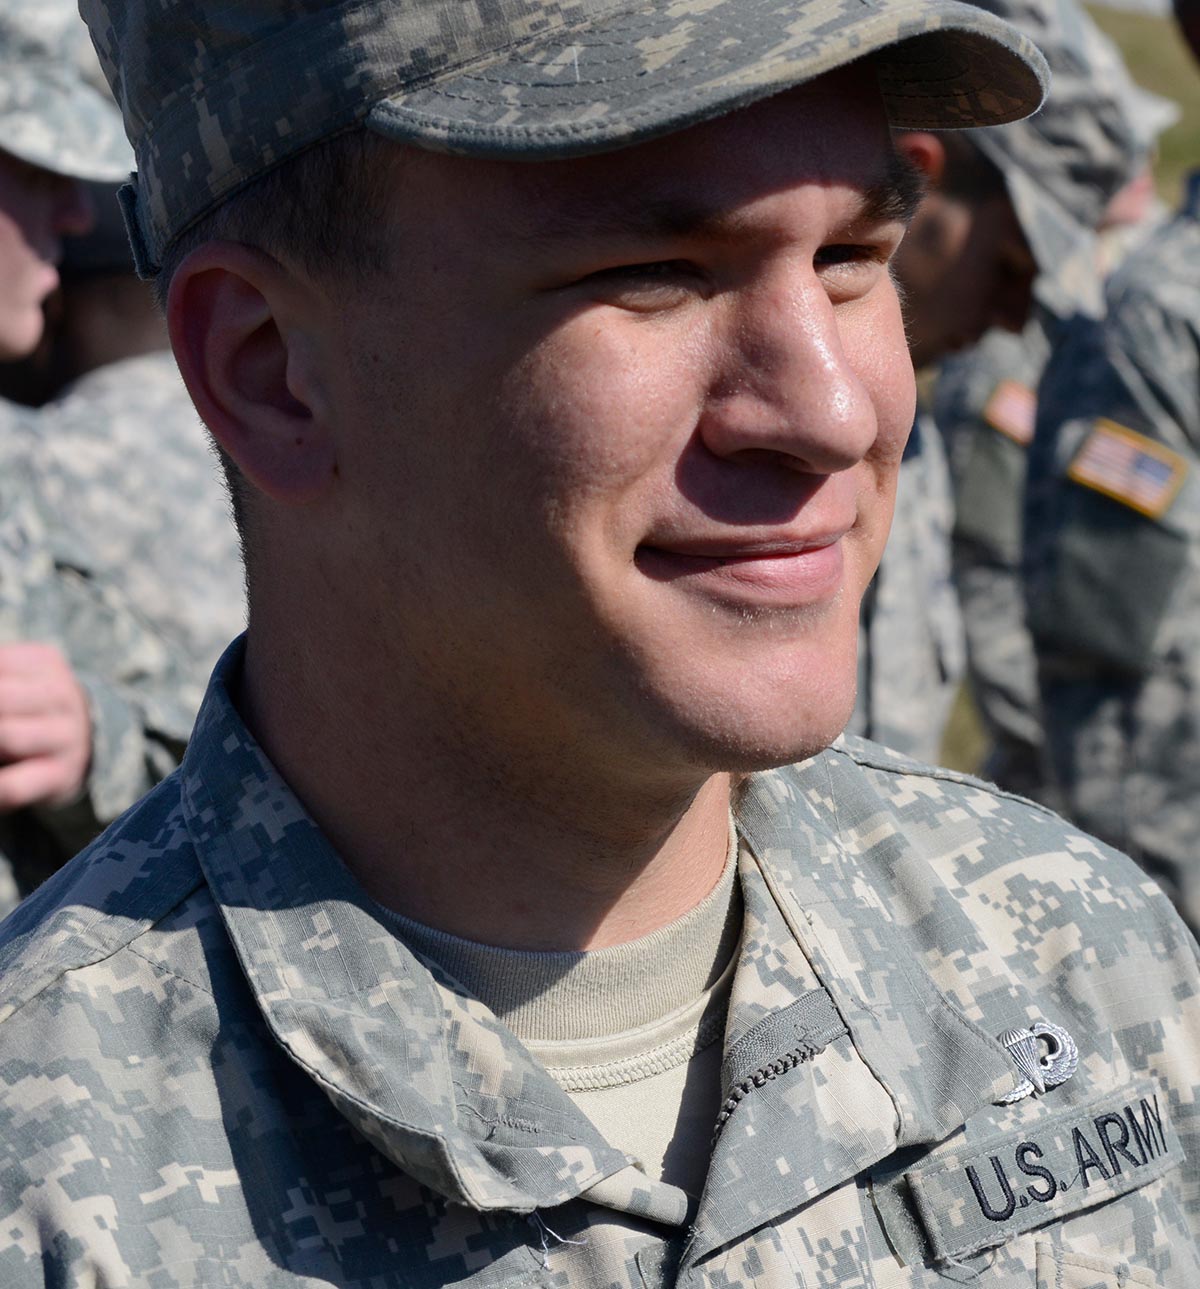 Sgt. Joseph Mille, a U.S. Army Marksmanship Unit shooter/instructor, graduated Nov. 14, 2014, from the Basic Airborne Course at Fort Benning, Georgia. (U.S. Army photo by Sgt. 1st Class Raymond J. Piper)